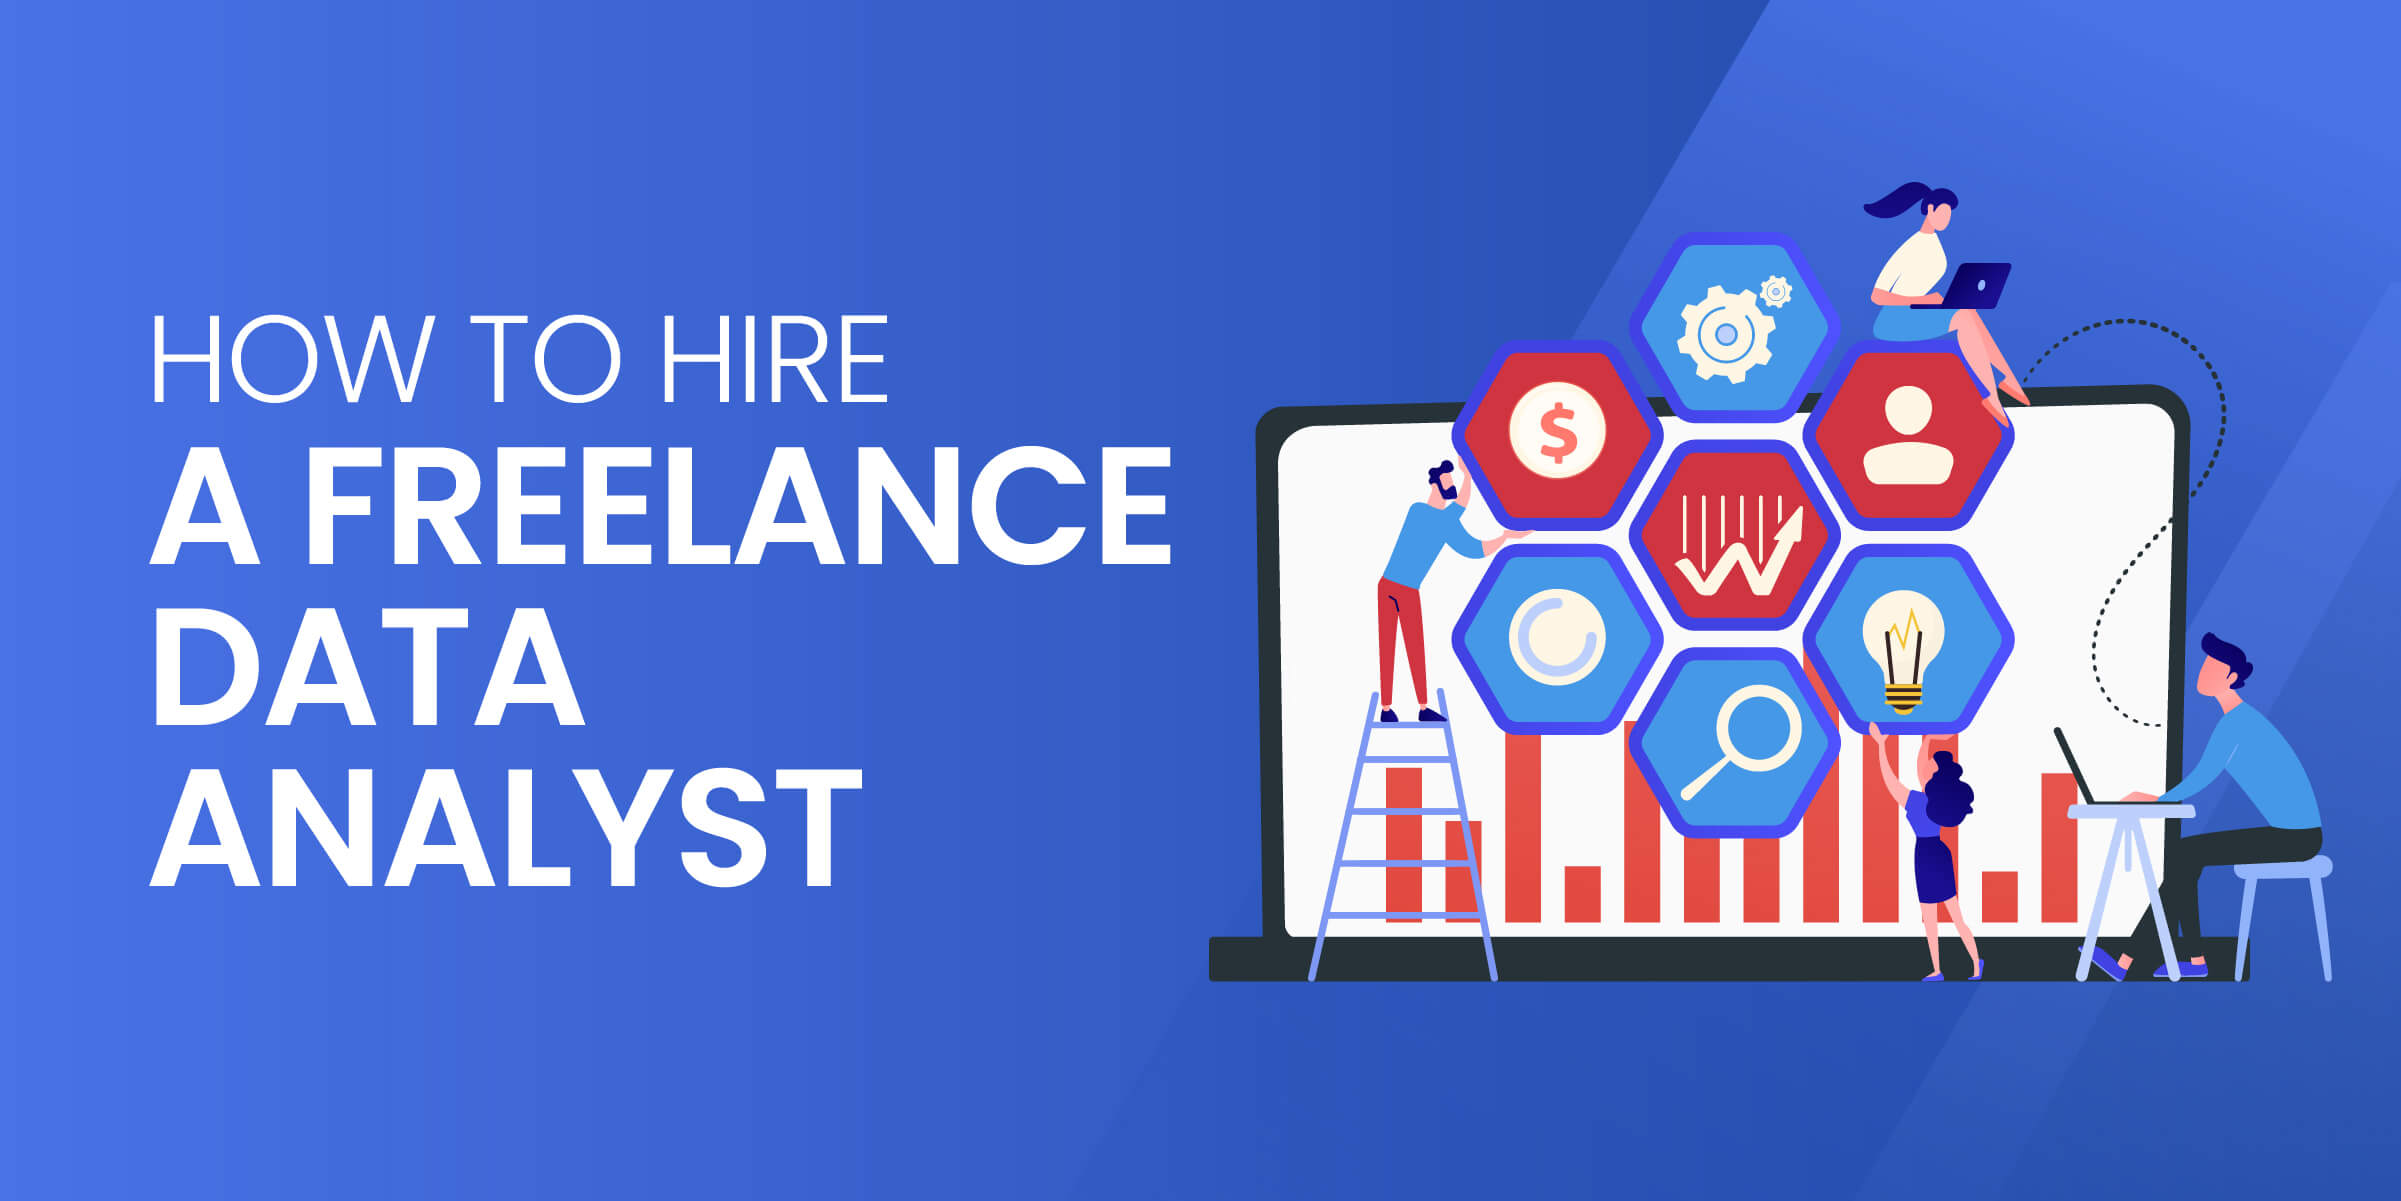 How to Hire Freelance Data Analyst